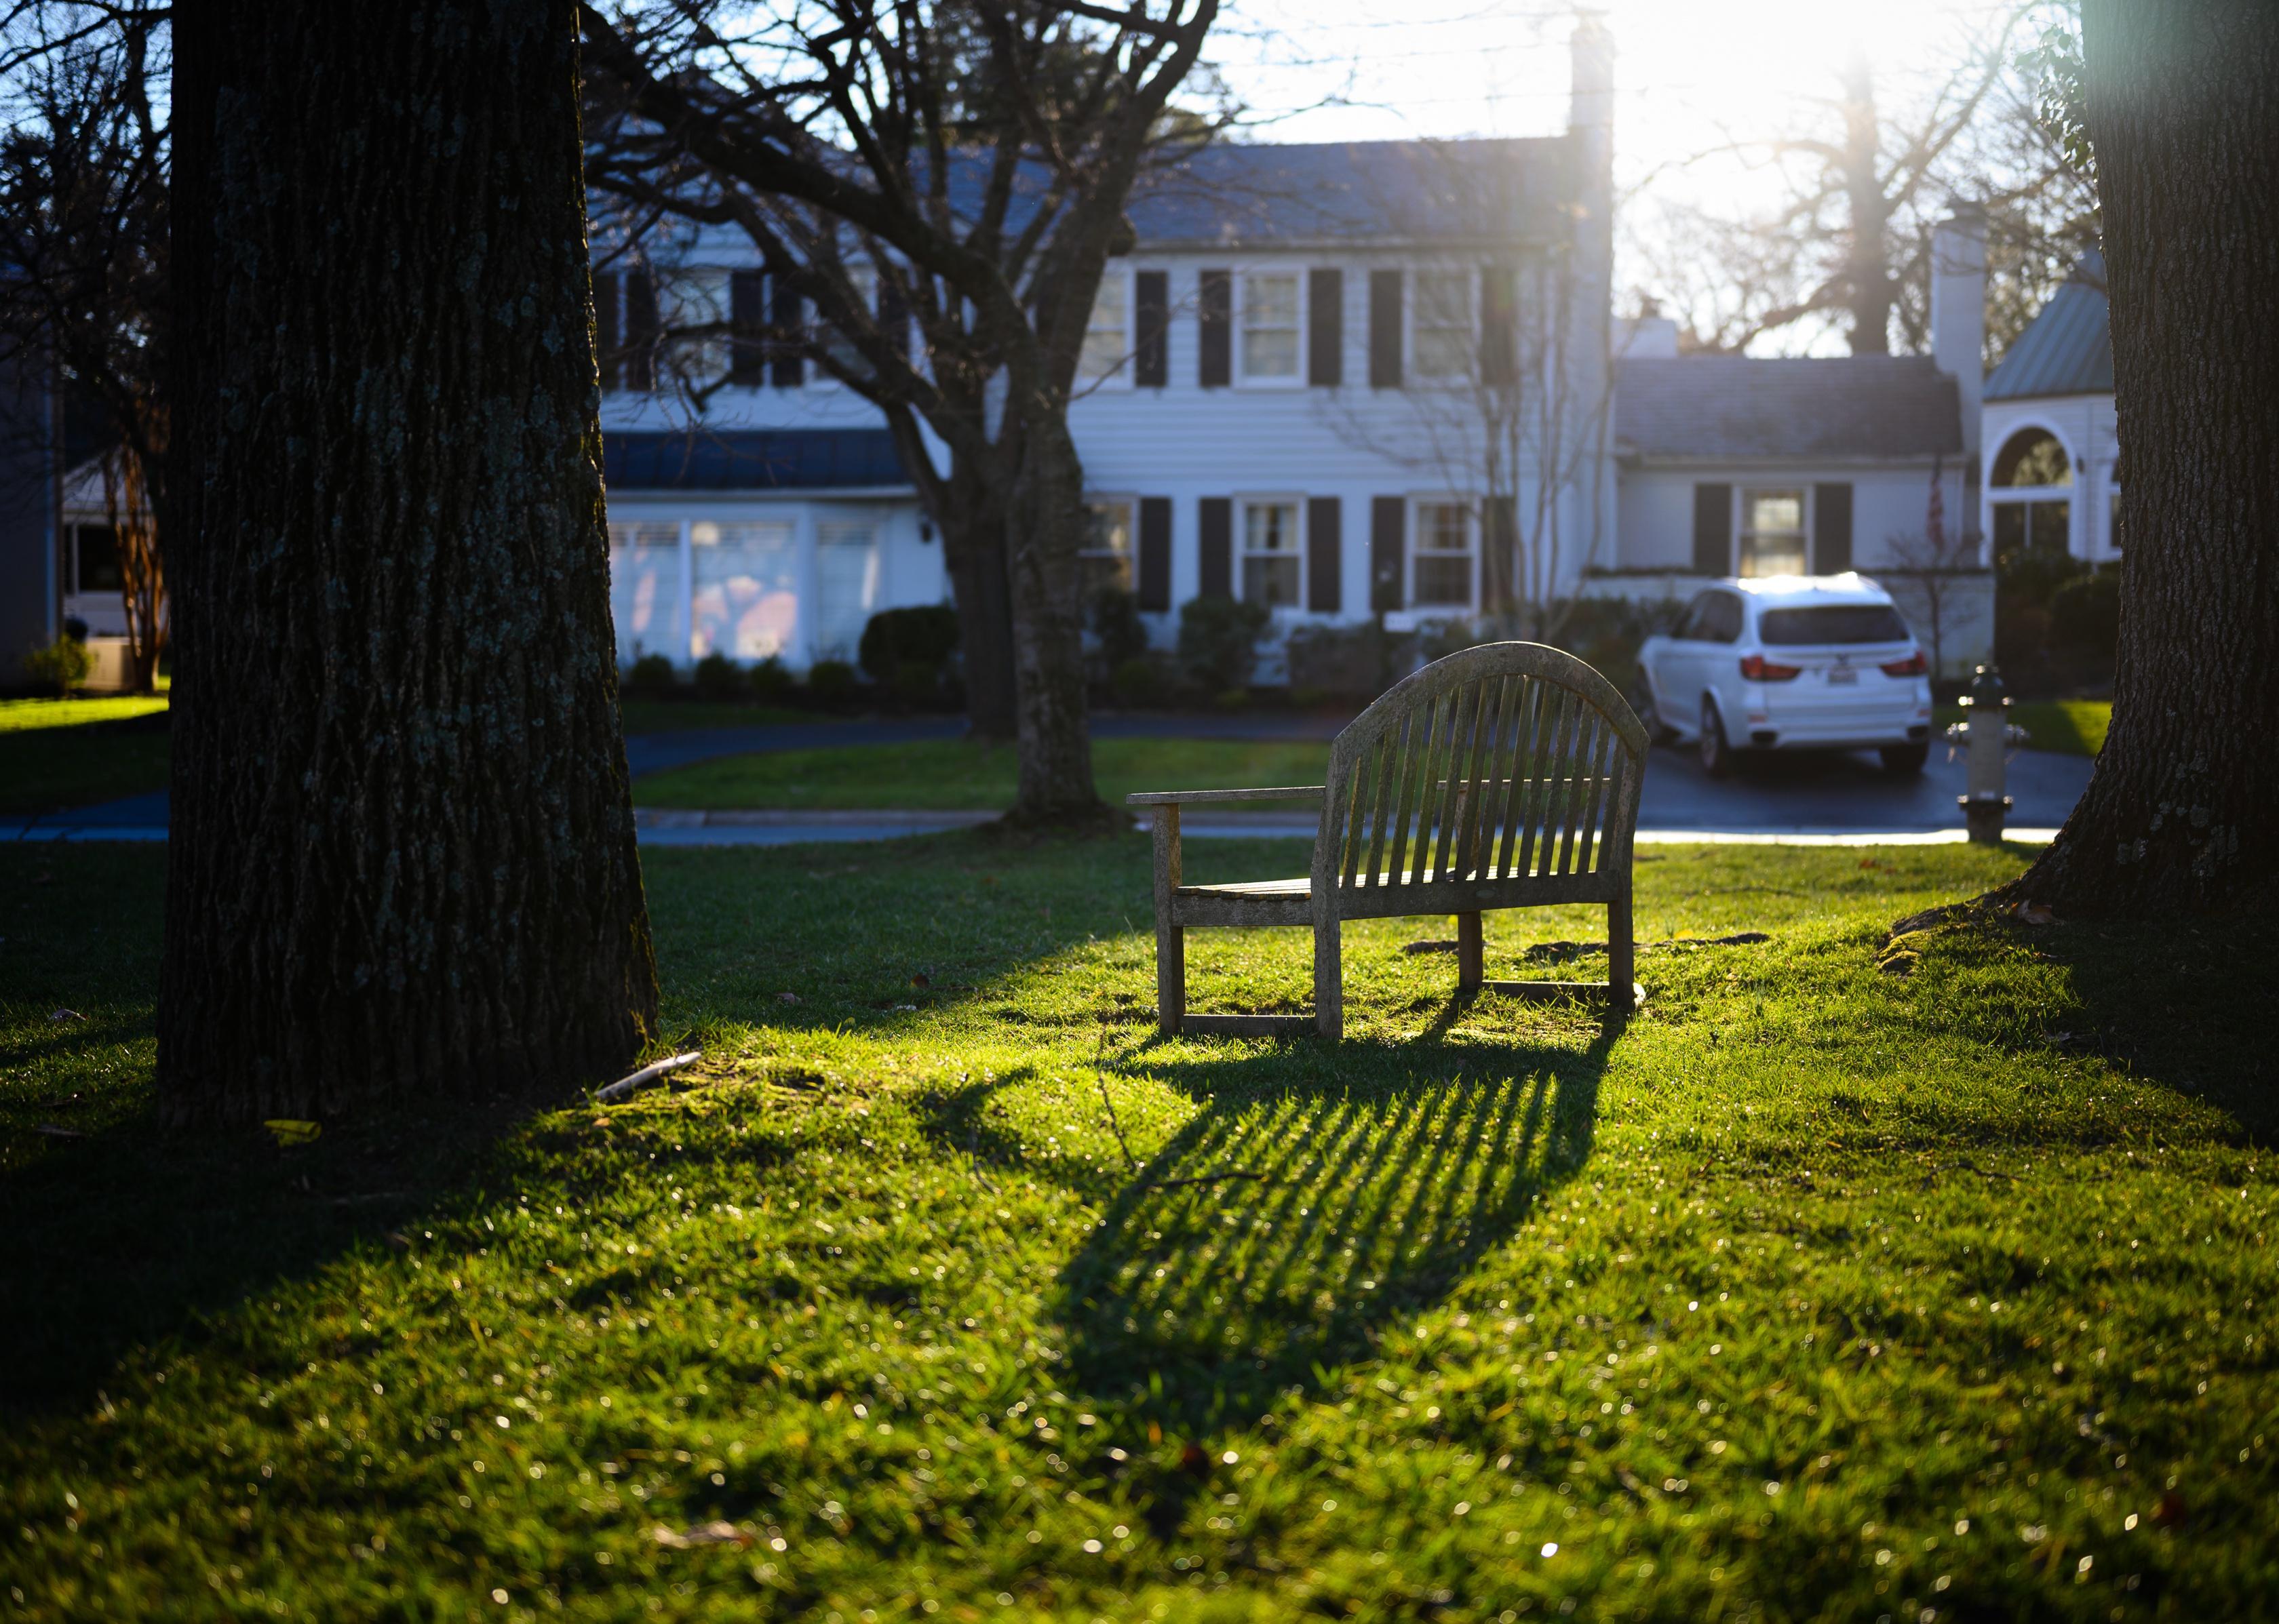 A wooden park bench in the green grass near historic homes.